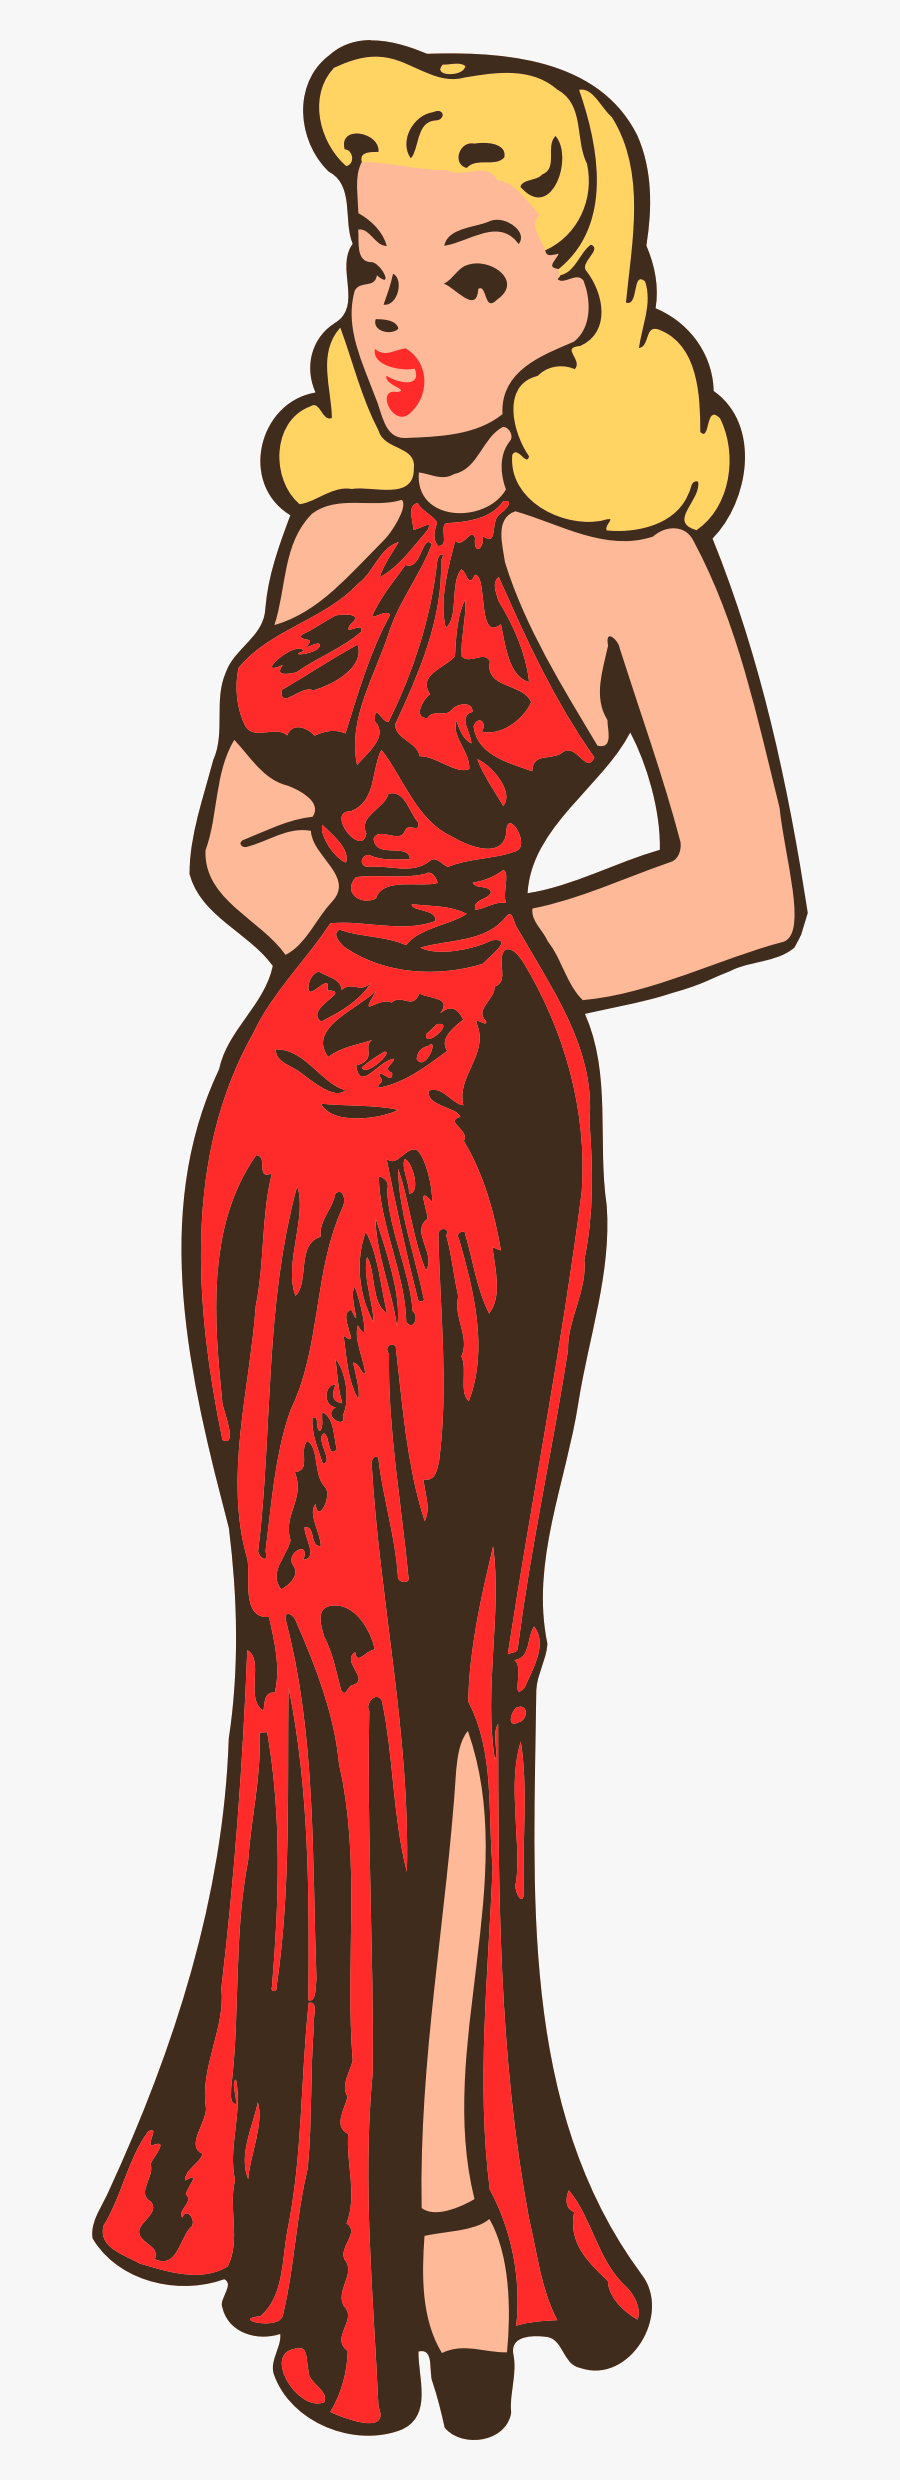 Glamorous Group - Glamorous Clipart Png, Transparent Clipart